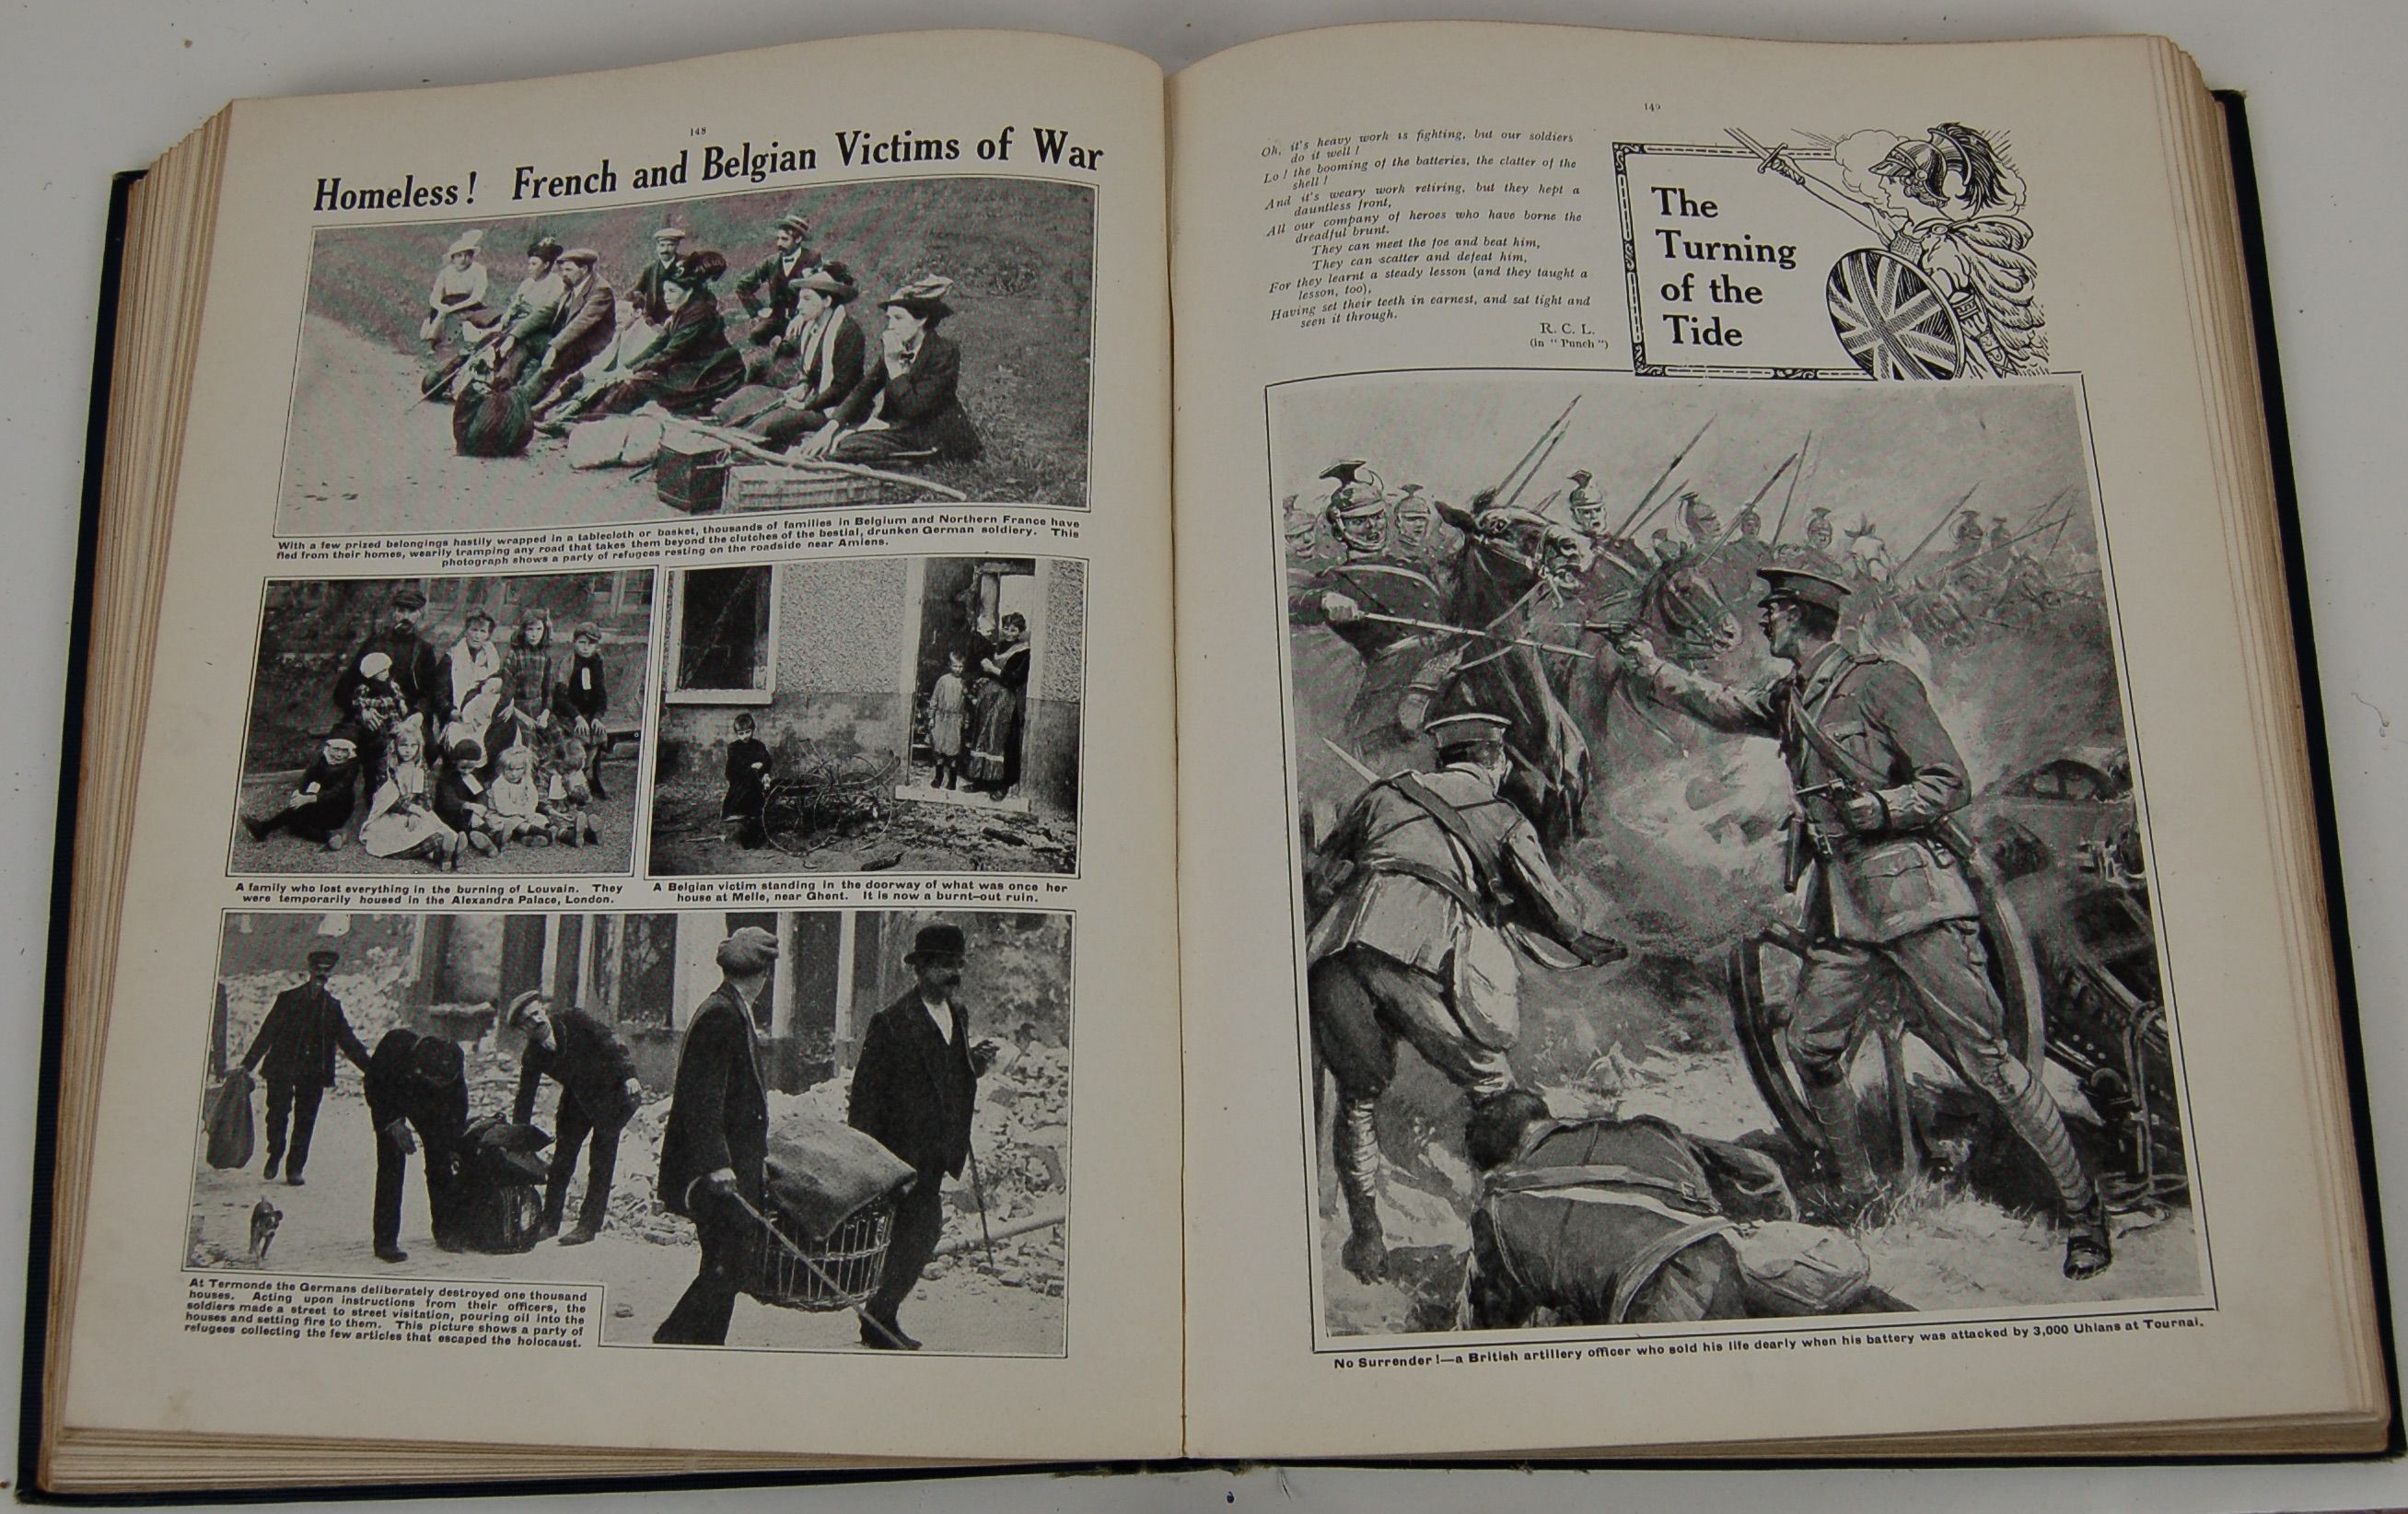 The War Illustrated Album DeLuxe. The Story of the Great European War Told by Camera, Pen, and Pencil.